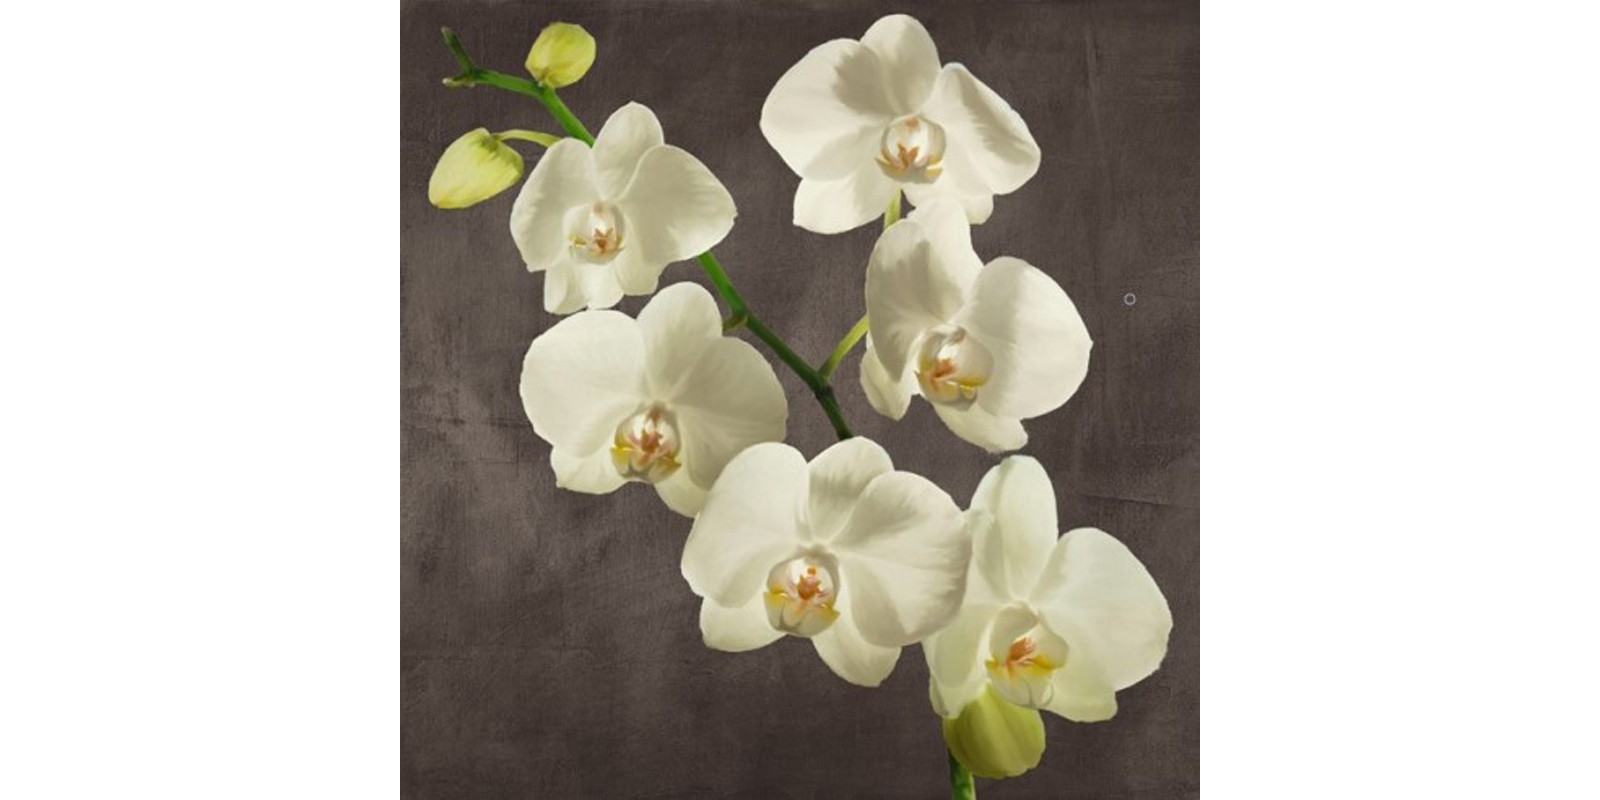 Andrea Antinori - Orchids on Grey Background I